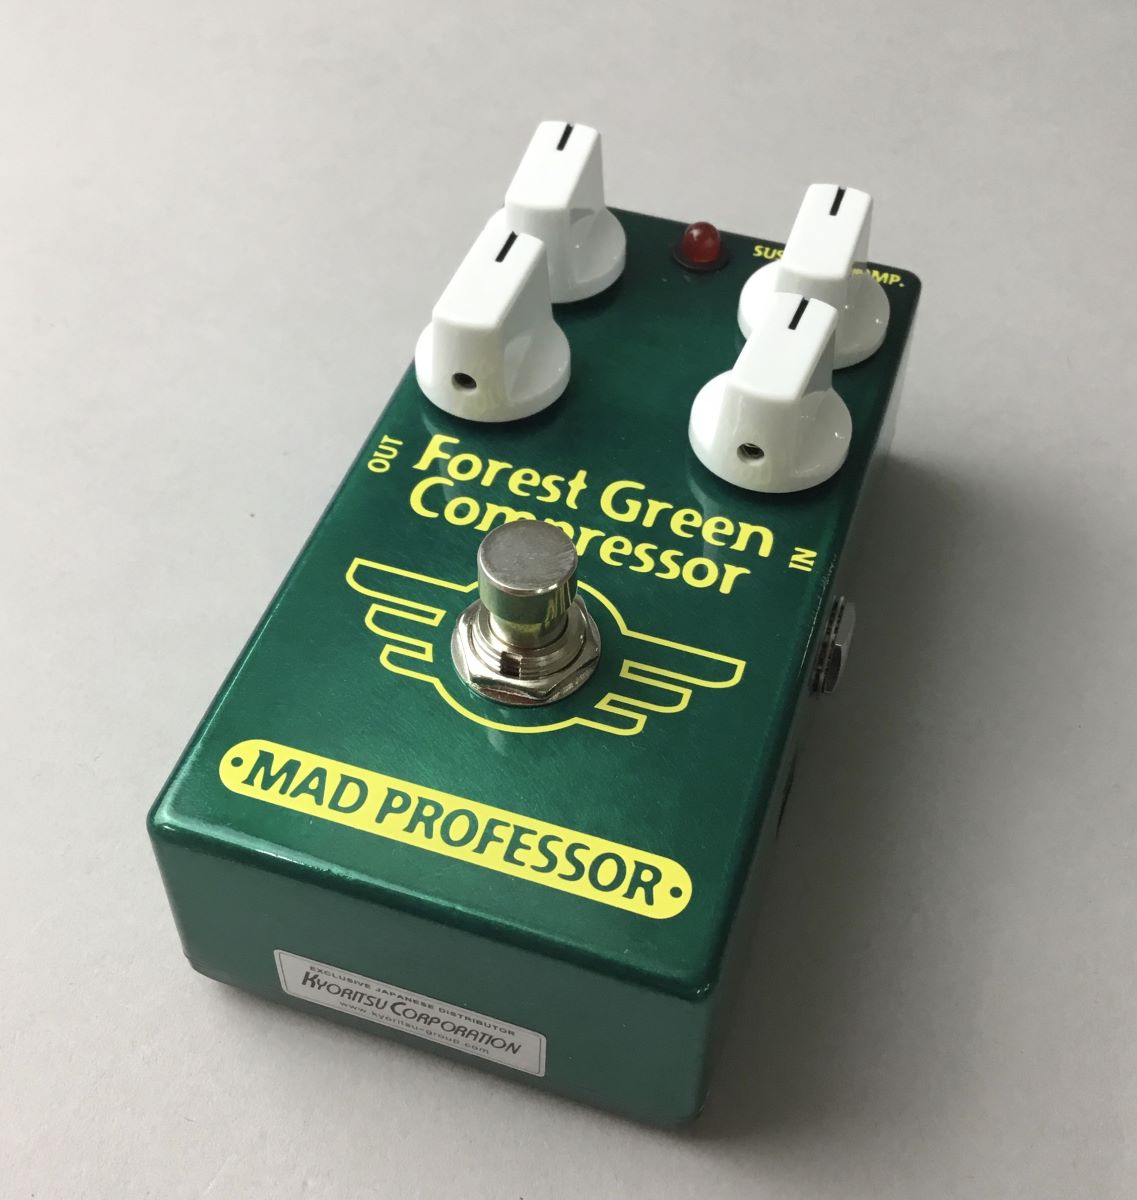 Mad Professor New Forest Green Compressor コンパクトエフェクター ...